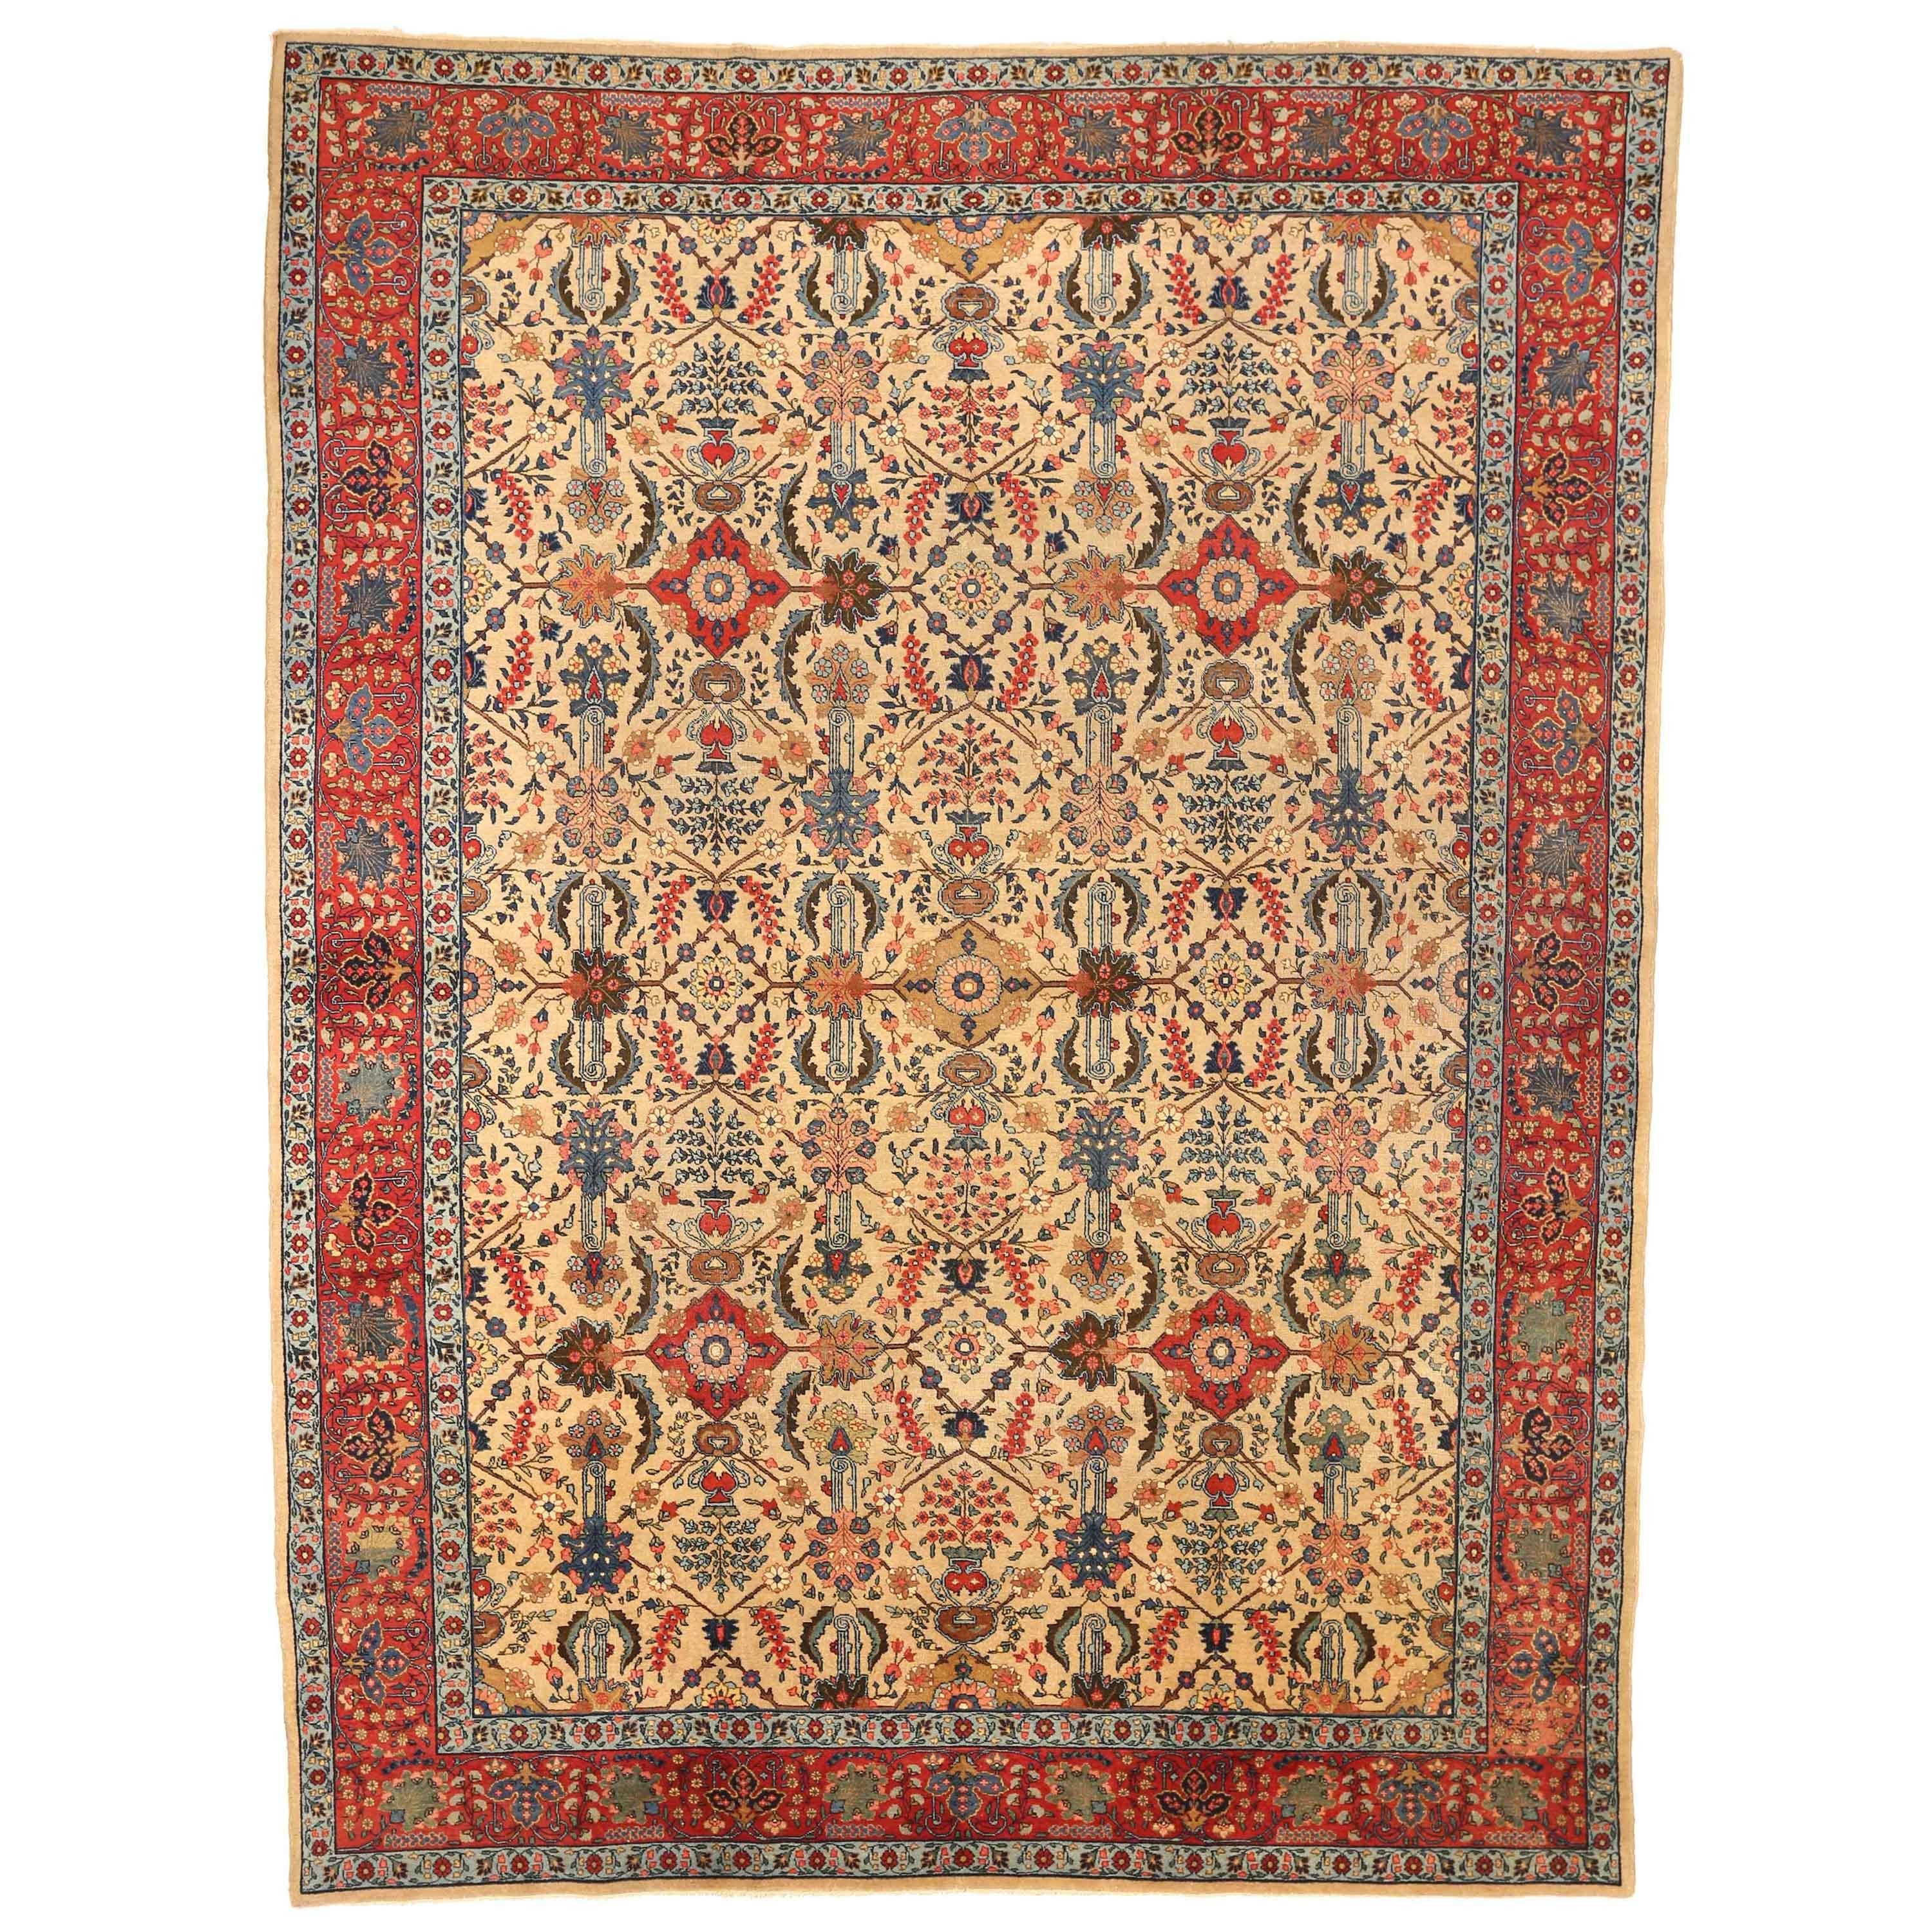 1950s Antique Persian Tabriz Rug with Lush ‘Herati’ Patterns in Red and Black For Sale